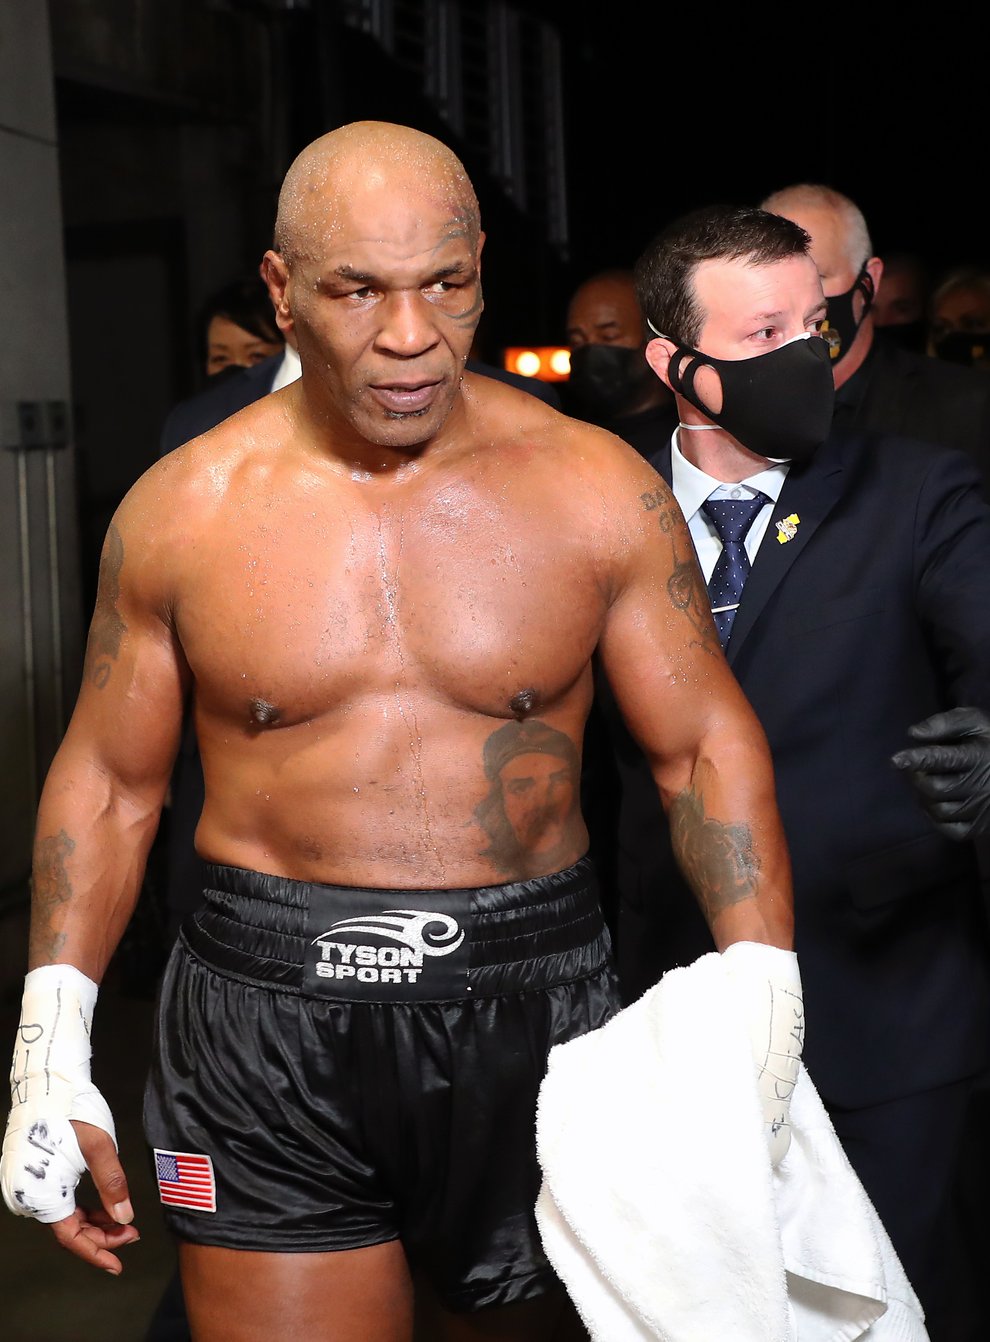 Tyson returned to the ring for the first time in 15 years on Saturday night